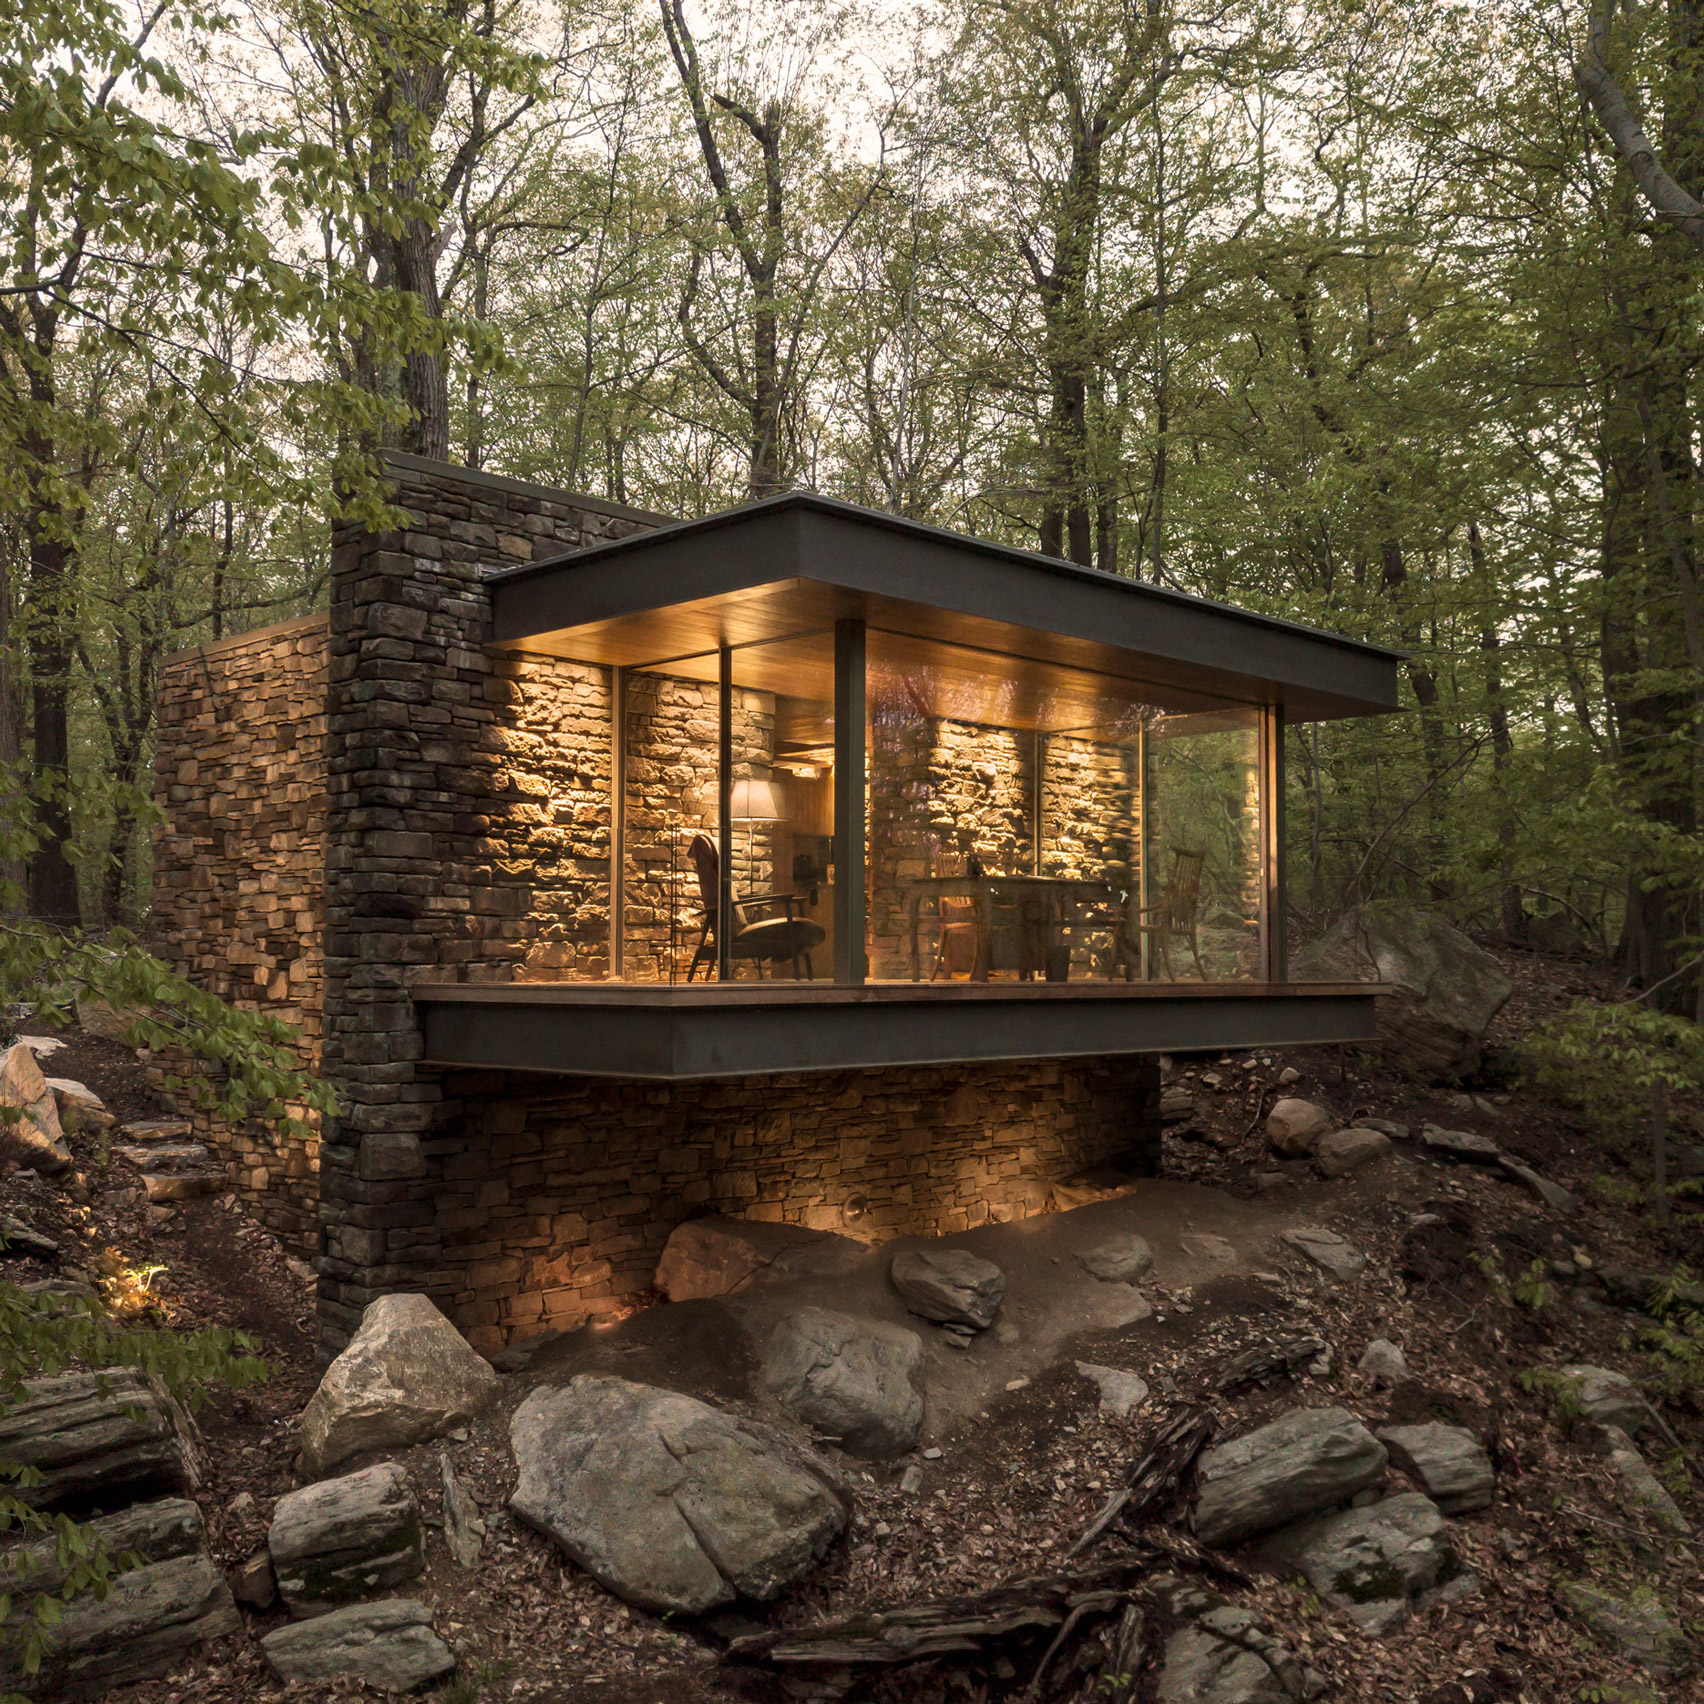 despise morphine Cut Eric J Smith cantilevers poet's writing studio over forested hillside